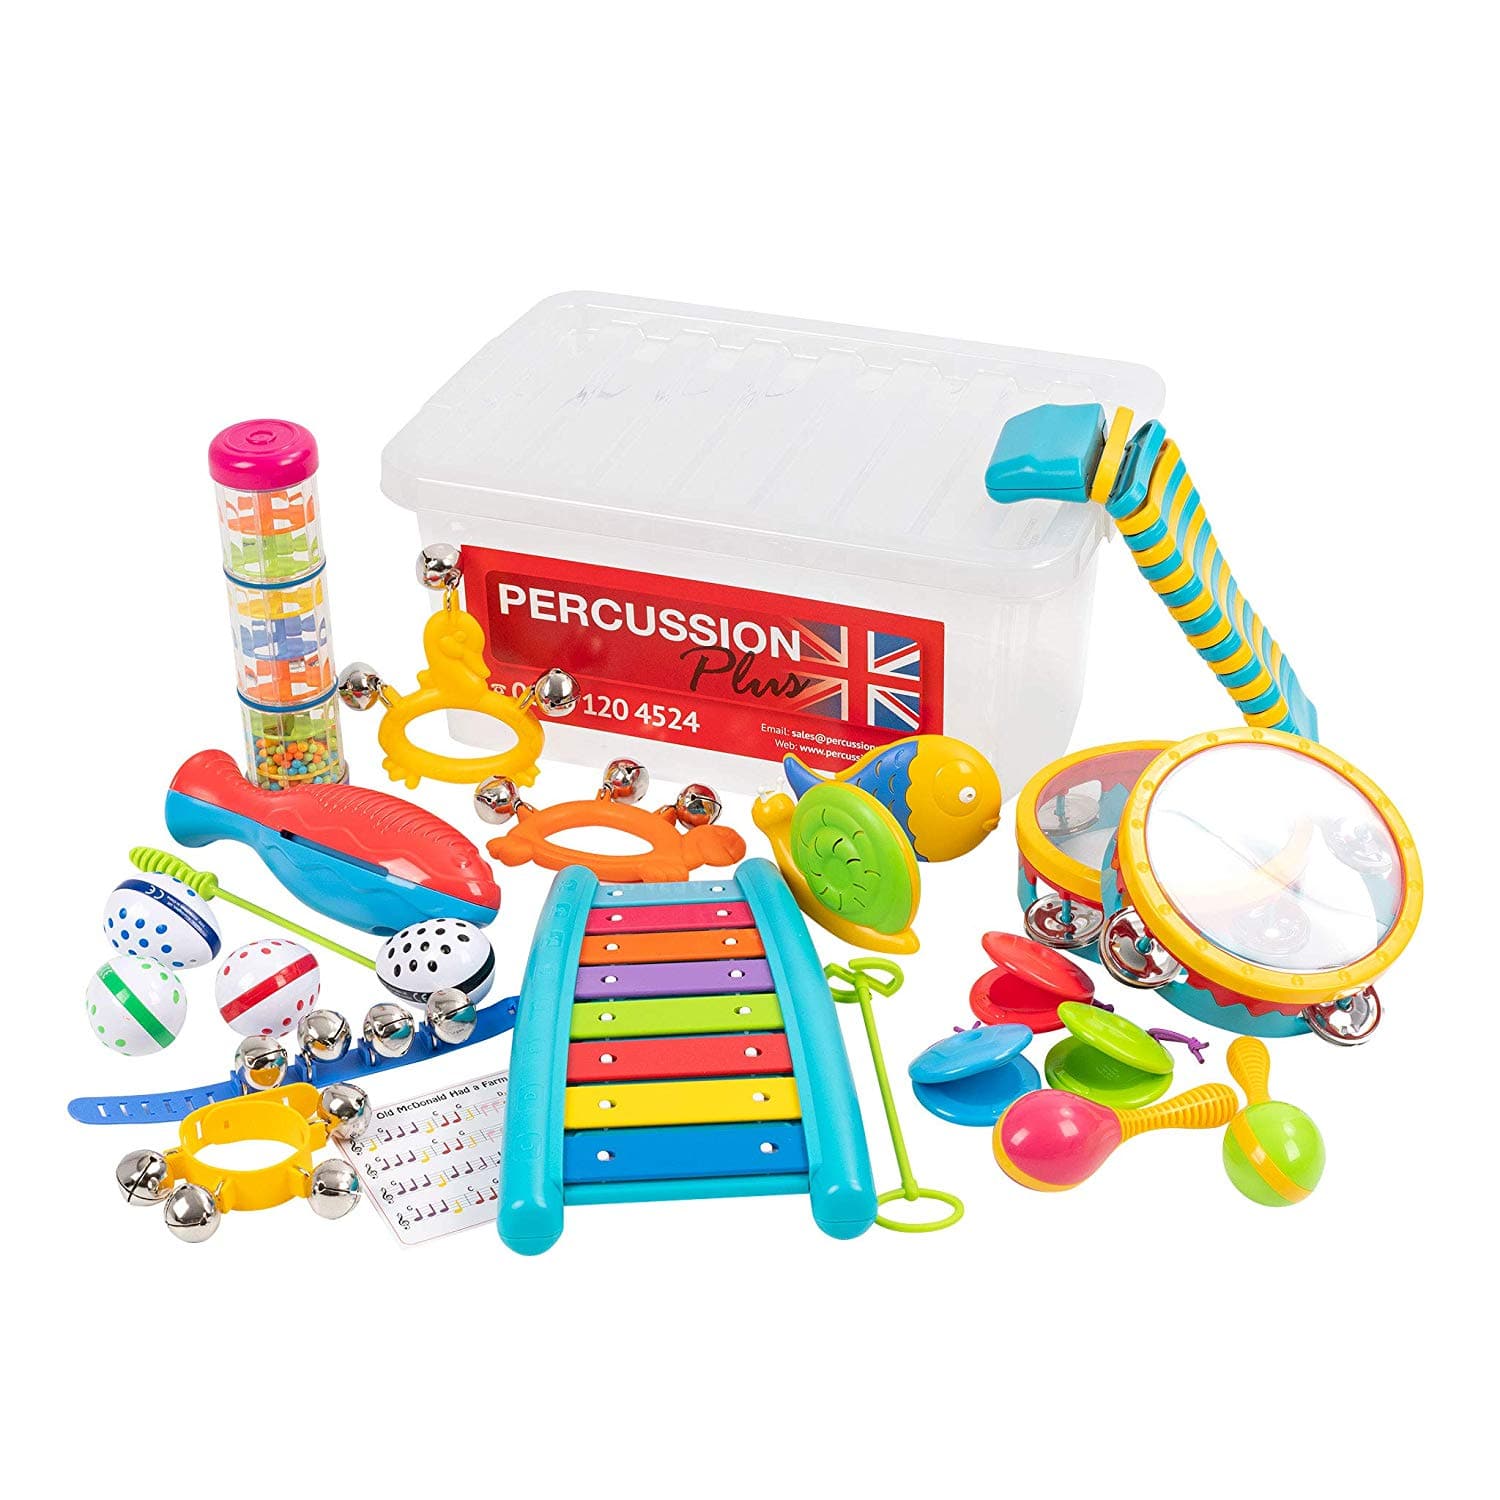 Small hands classroom pack, The best way for the whole class to get busy making music and interesting sounds! The Small hands classroom pack contains a fantastic quality selection of hand held percussion for early years. This Small hands classroom pack is the best way for the whole class to get busy making music and interesting sounds! It is a fantastic quality selection of hand held percussion for early years, supplied in strong storage box with lid. Great variety of hand held percussion items Ideal for cl